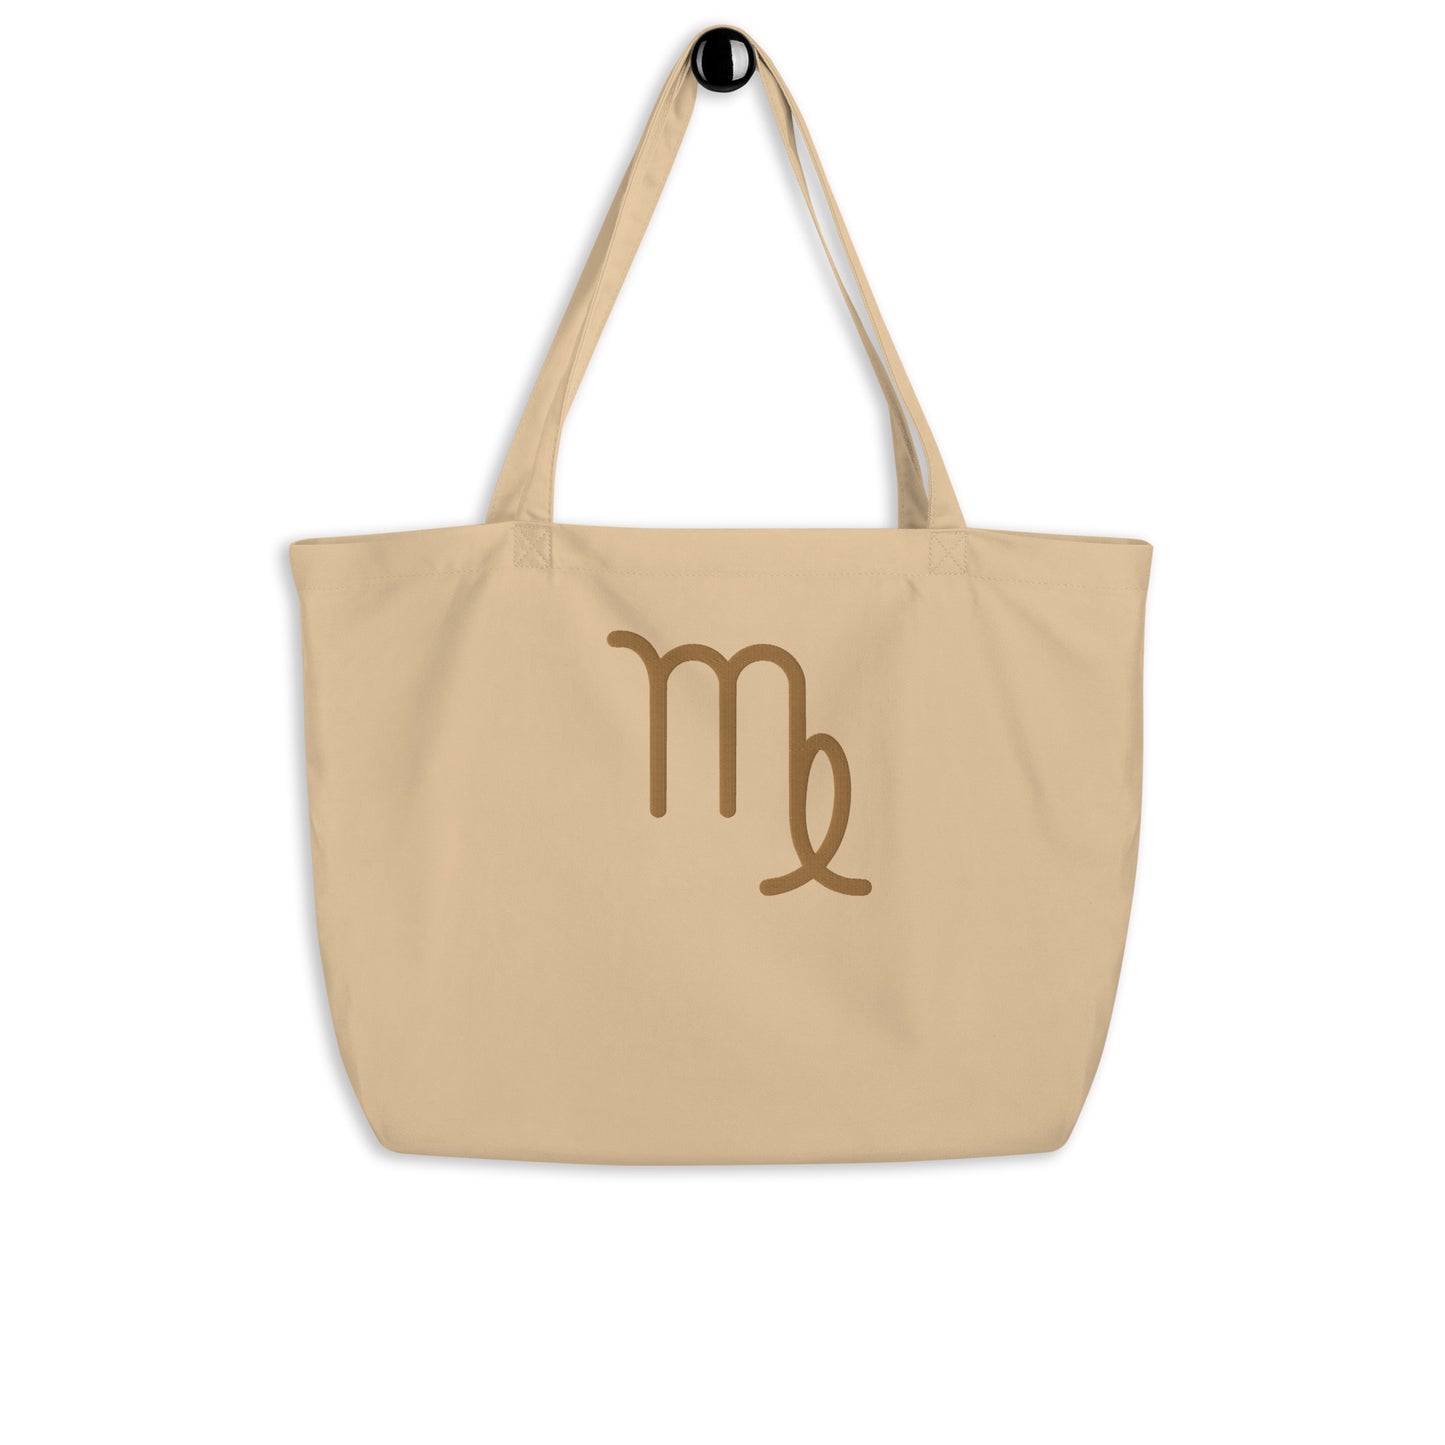 Virgo - Large Open Tote Bag - Gold Thread